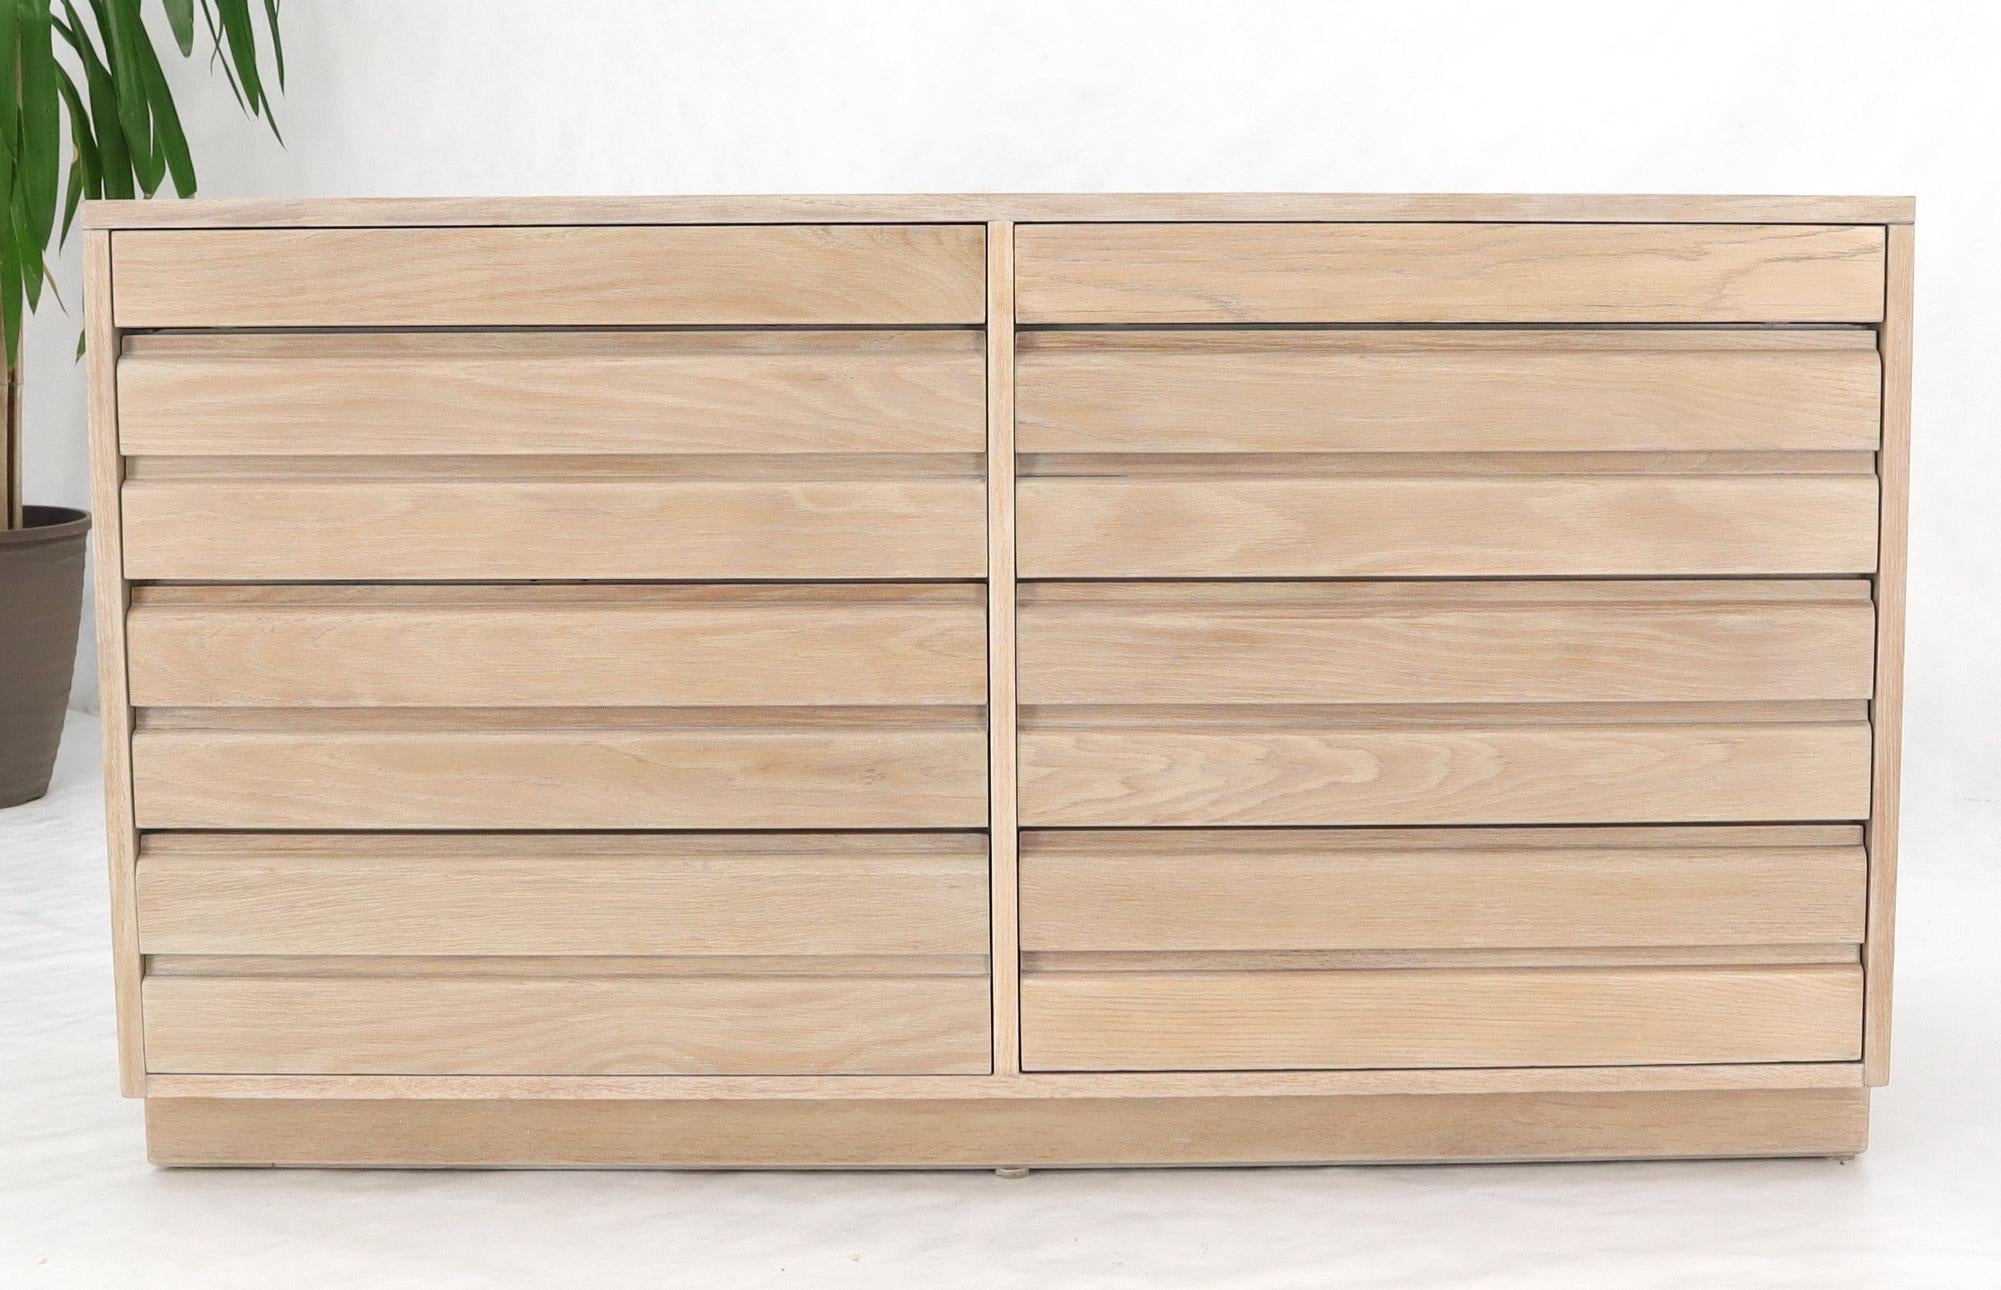 American Solid Oak White Wash Eight Drawers Mid-Century Modern Double Dresser Credenza